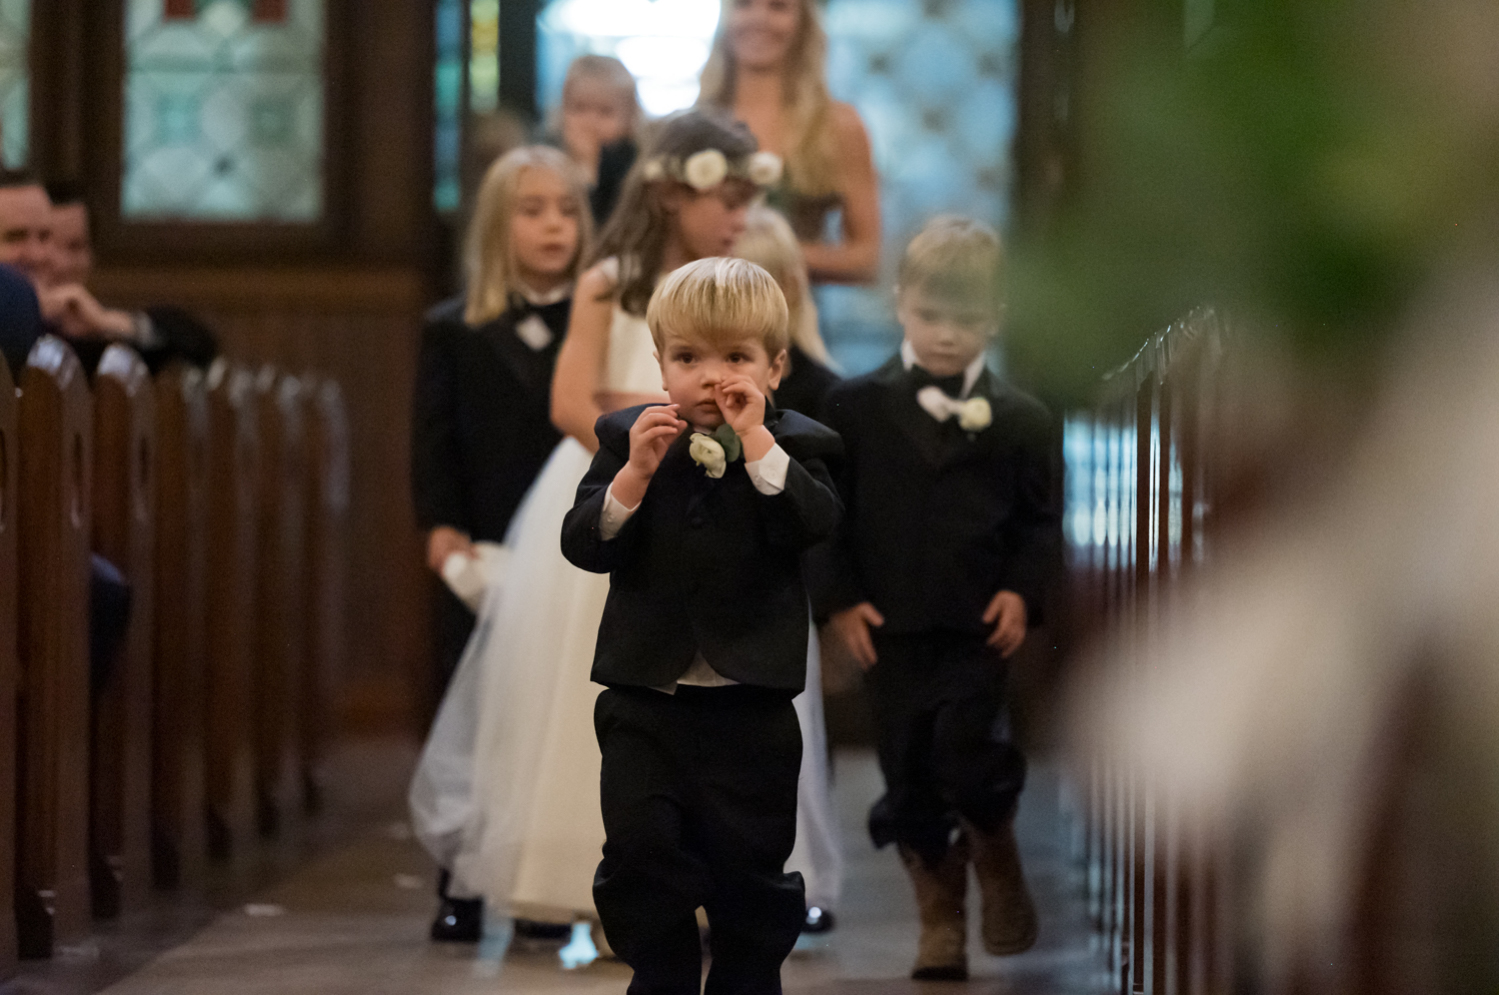 A little boy walks down the aisle with the ring bearers and flower girl.